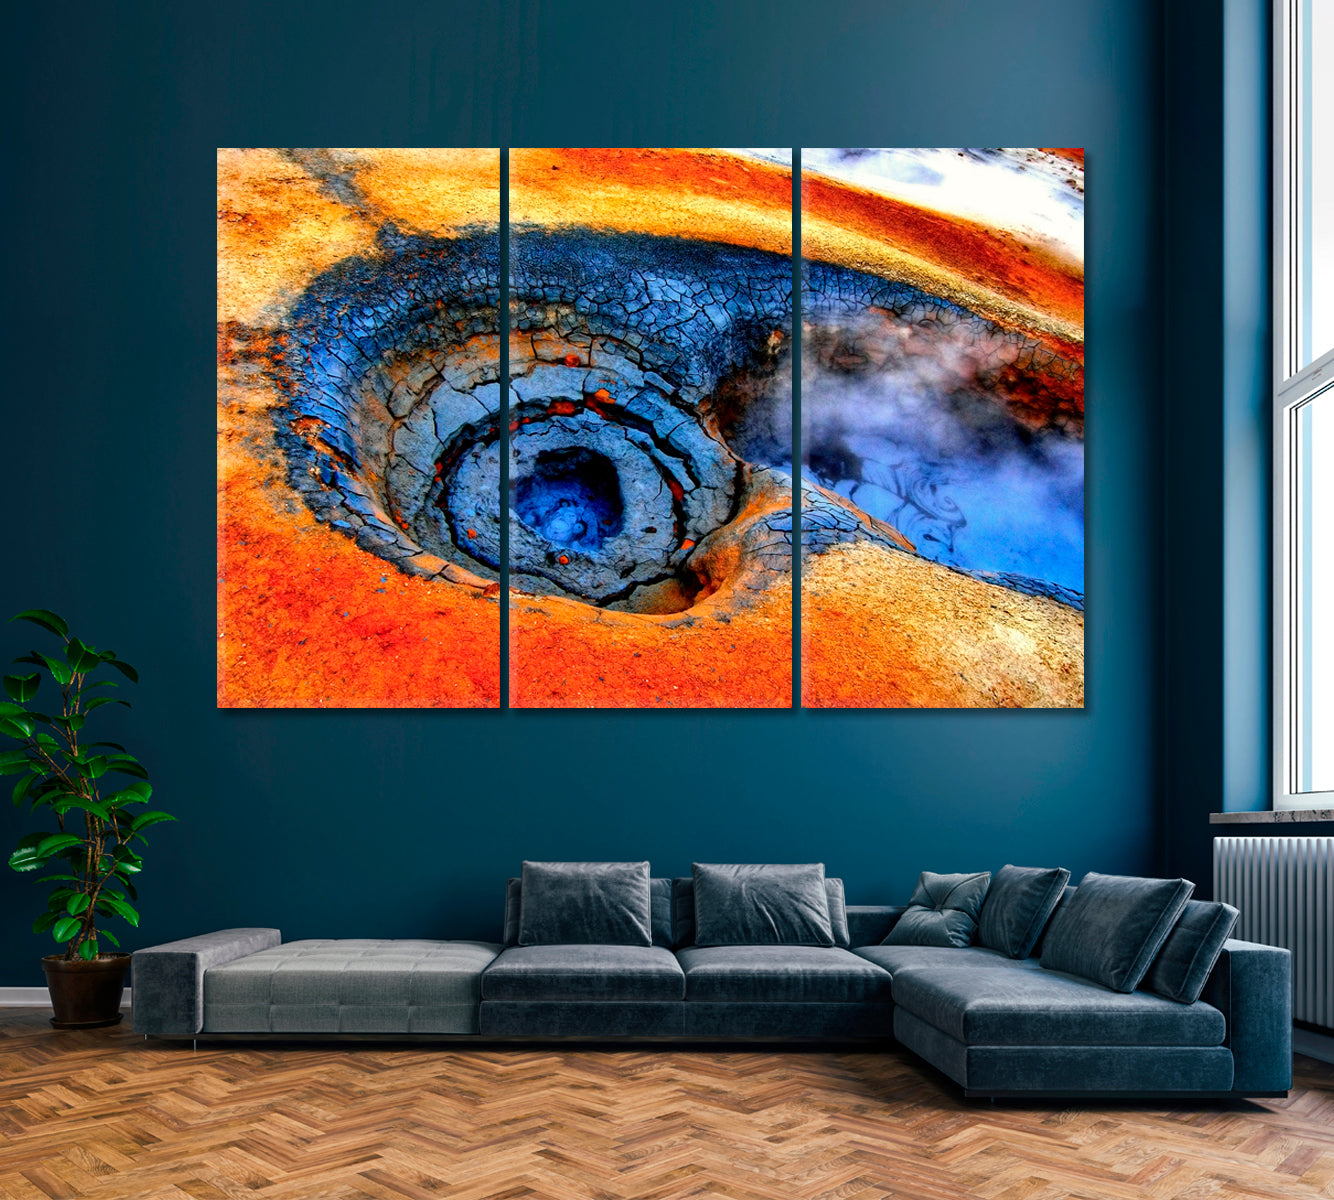 Volcanic Geysers Iceland Canvas Print ArtLexy 3 Panels 36"x24" inches 